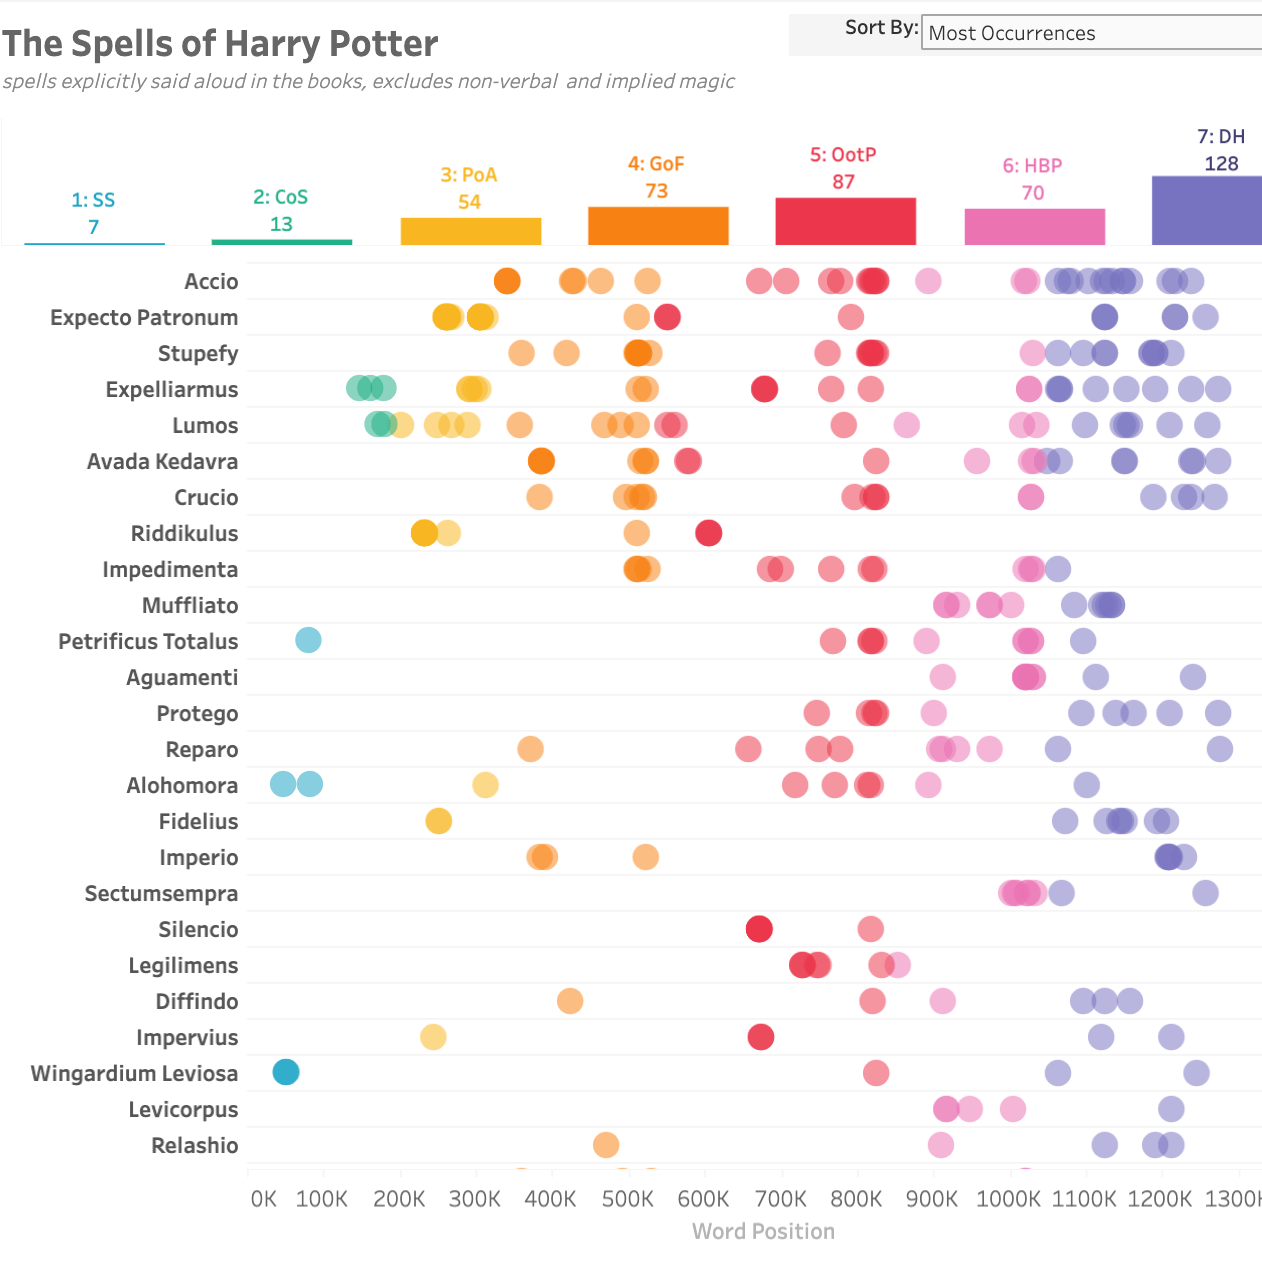 Navigate to The Spells of Harry Potter